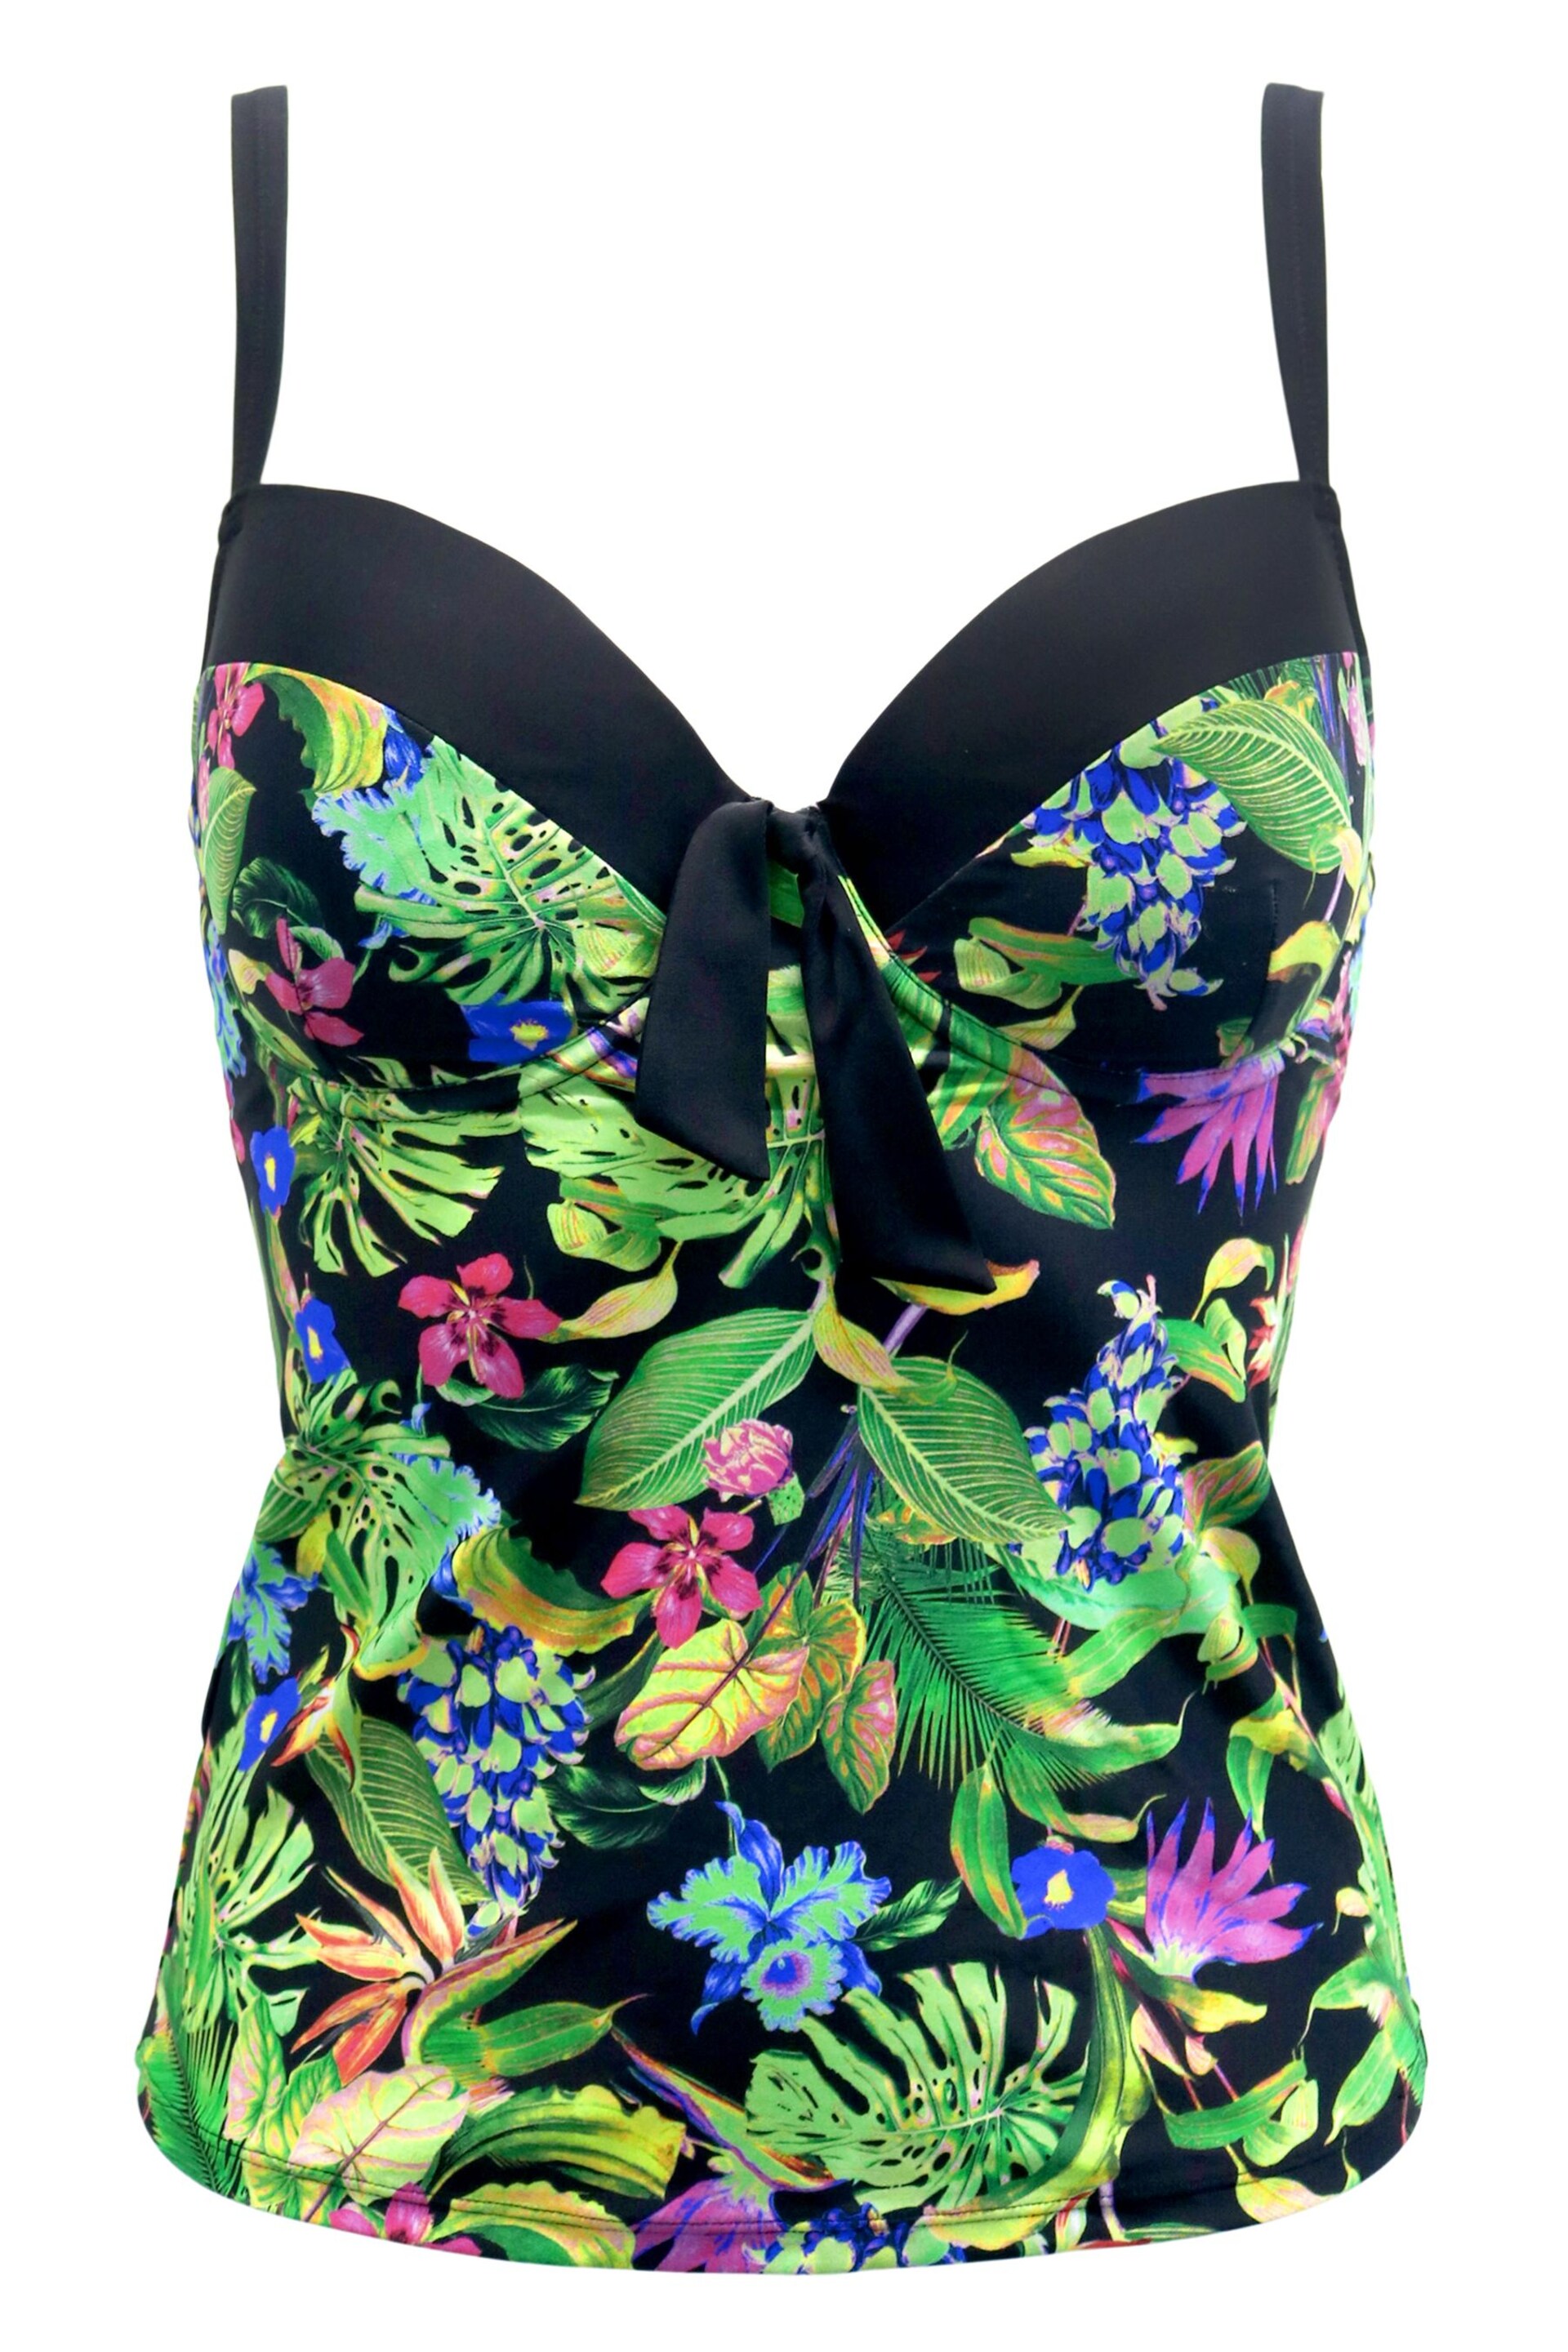 Pour Moi Black/Green St Lucia Padded Tankini - Image 4 of 5